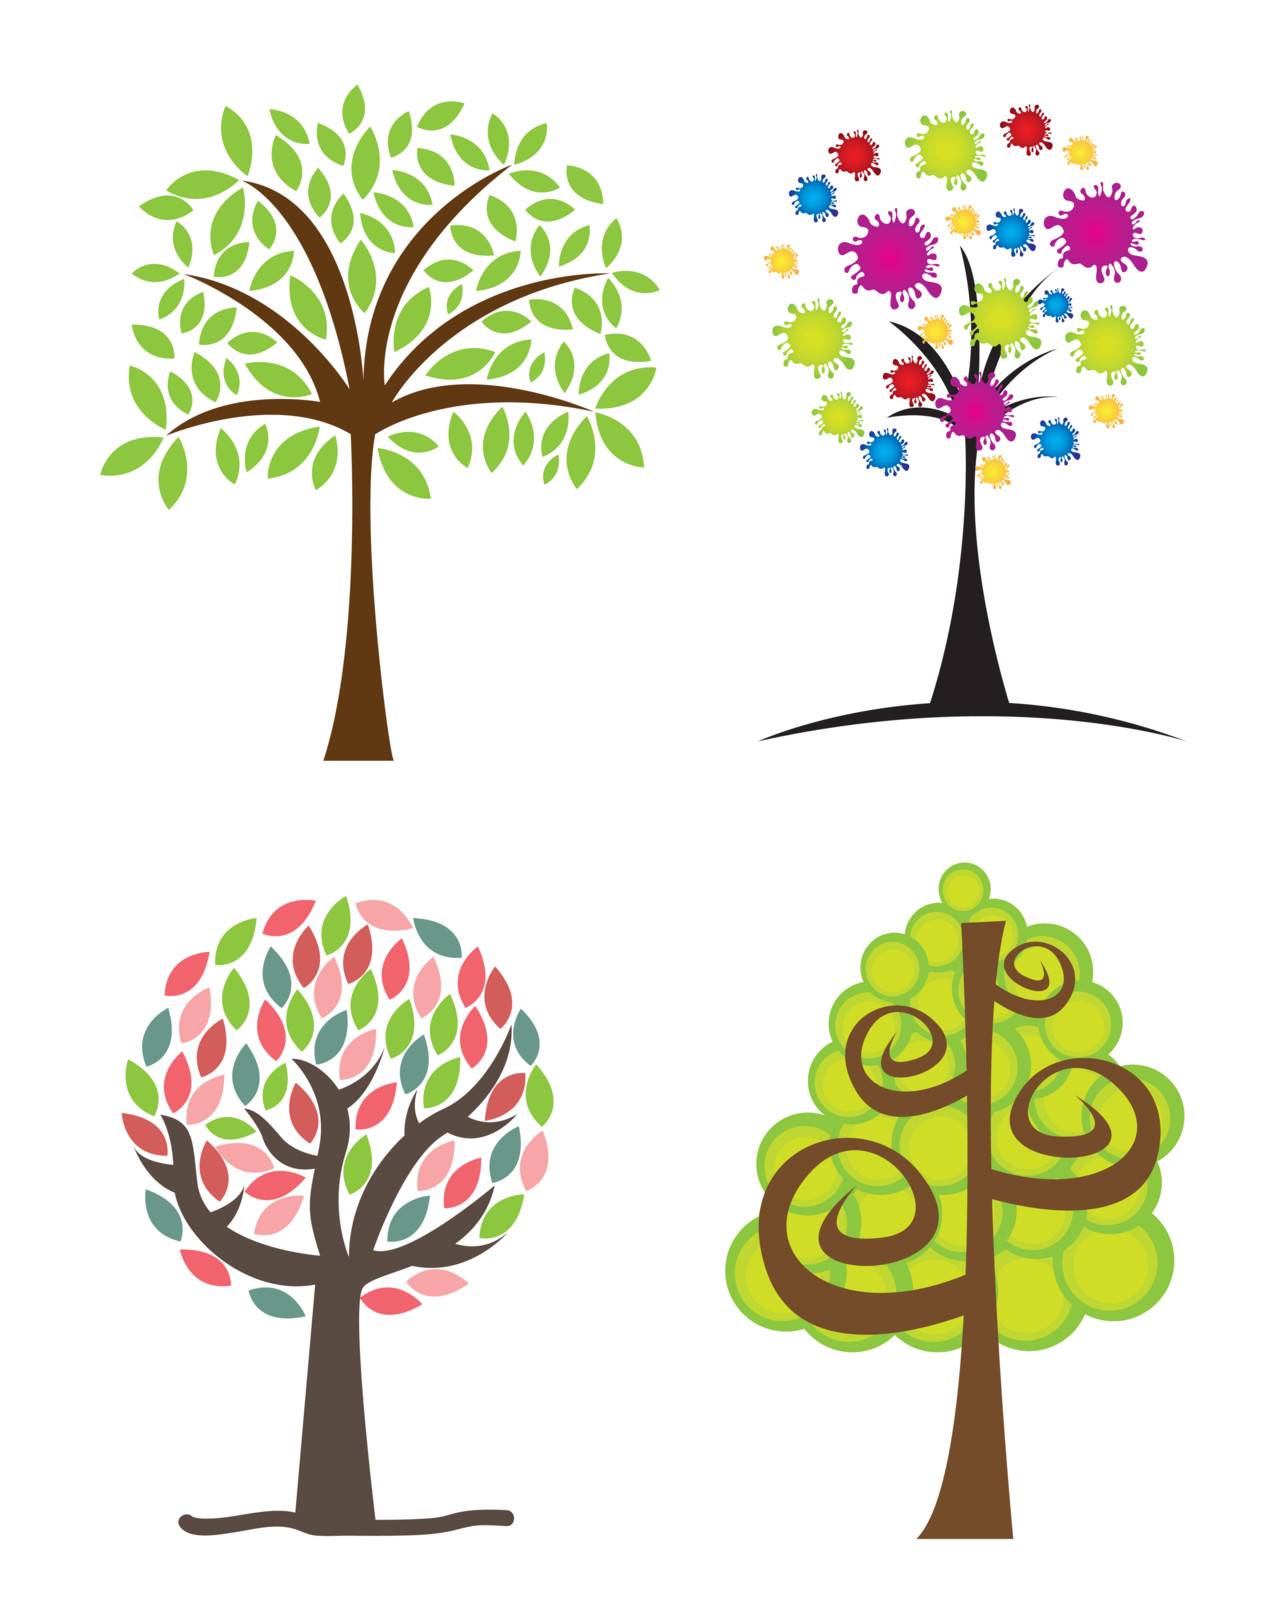 trees with different types of leaves over white background